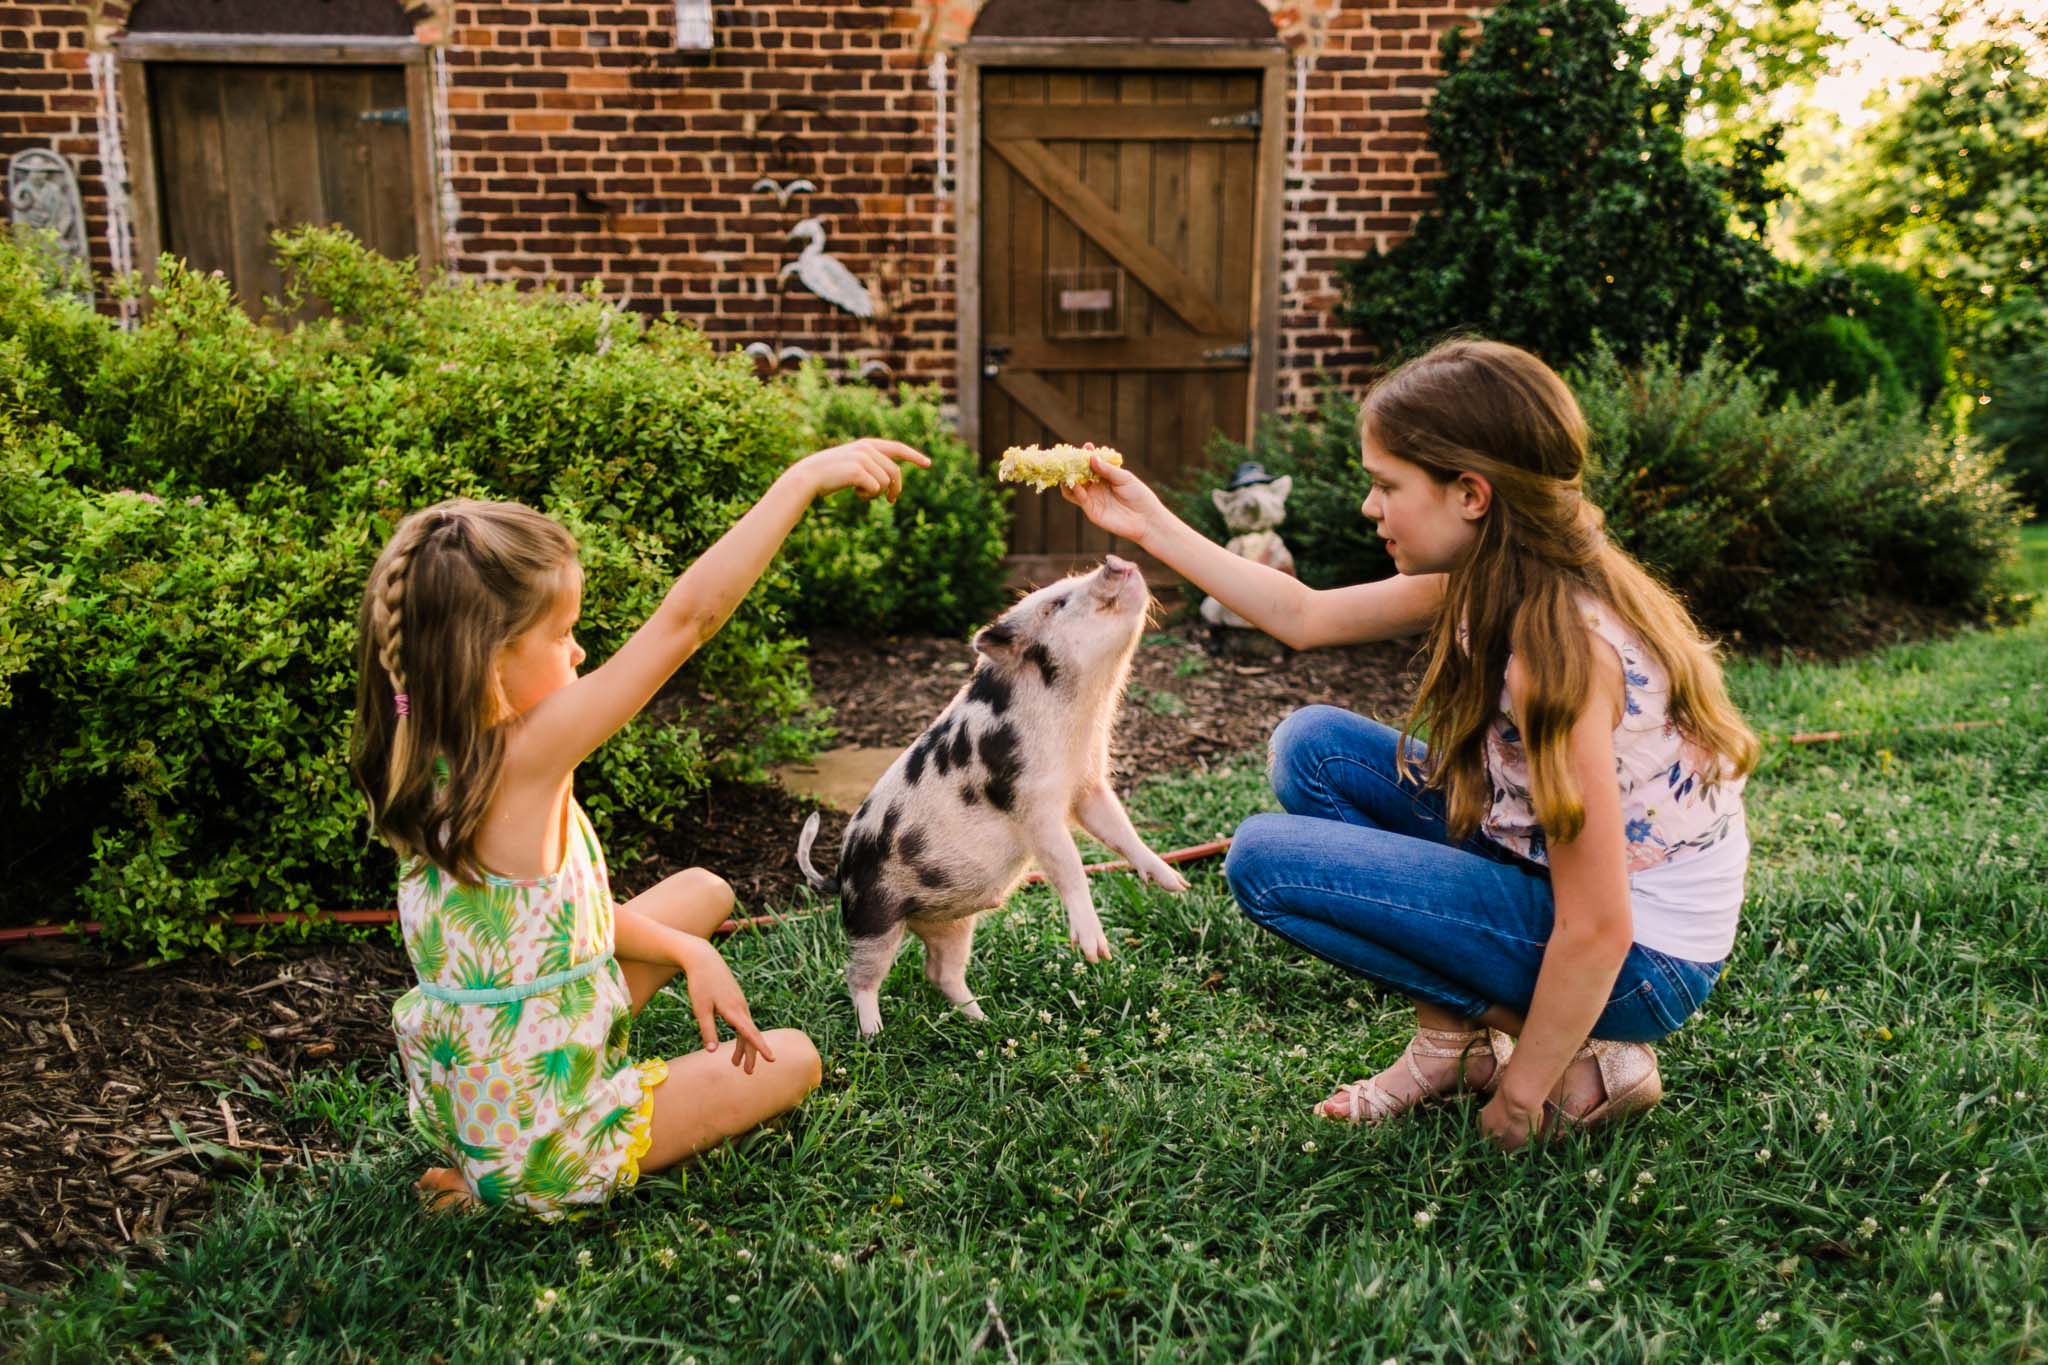 Durham Family Photographer | By G. Lin Photography | Miniature pig jumping